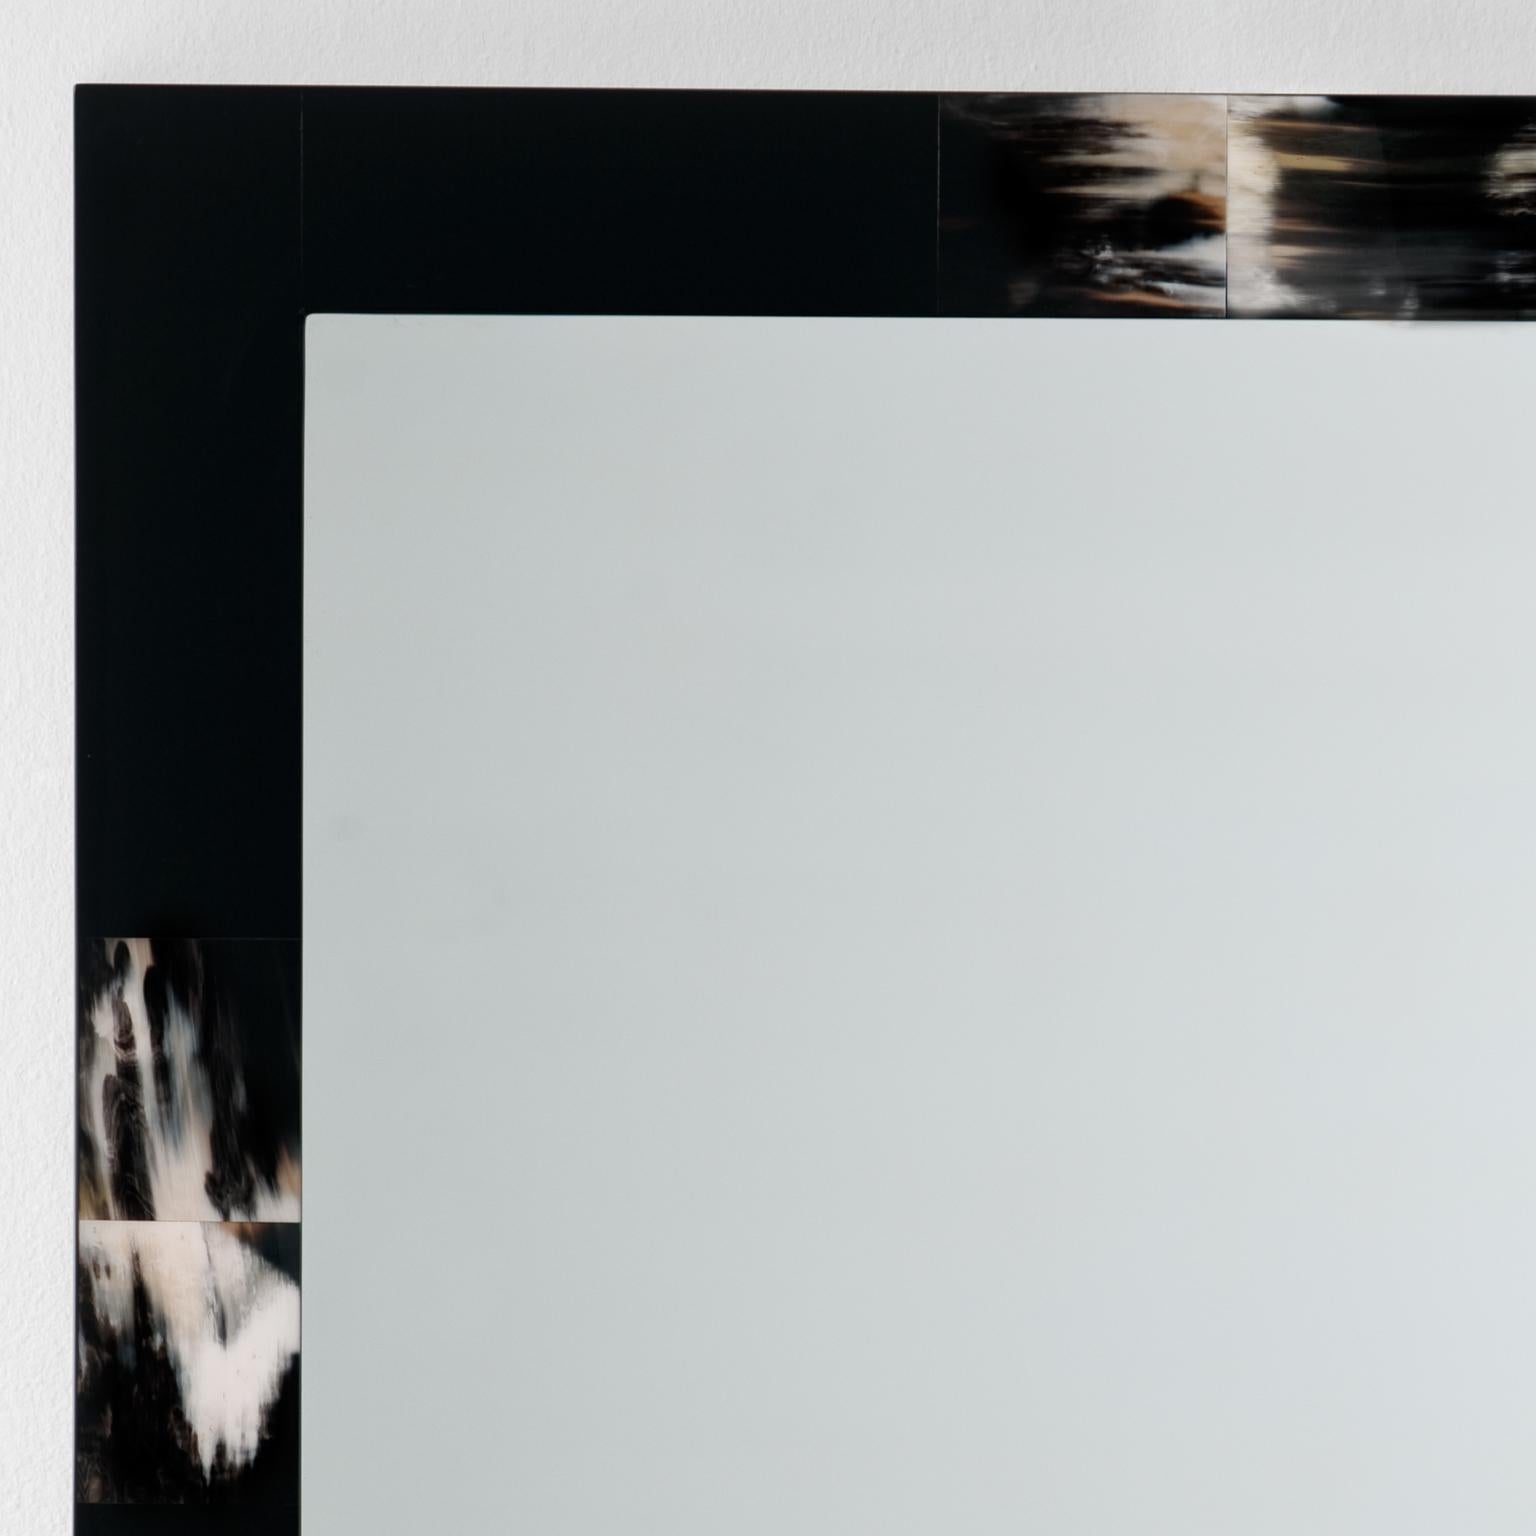 The Erasmo wall mirror achieves its elegance and uniqueness by combining simplicity of design with luxurious craftsmanship and materials. Individually handcut tiles in Corno Italiano are laid in a square wooden structure finished in polished black